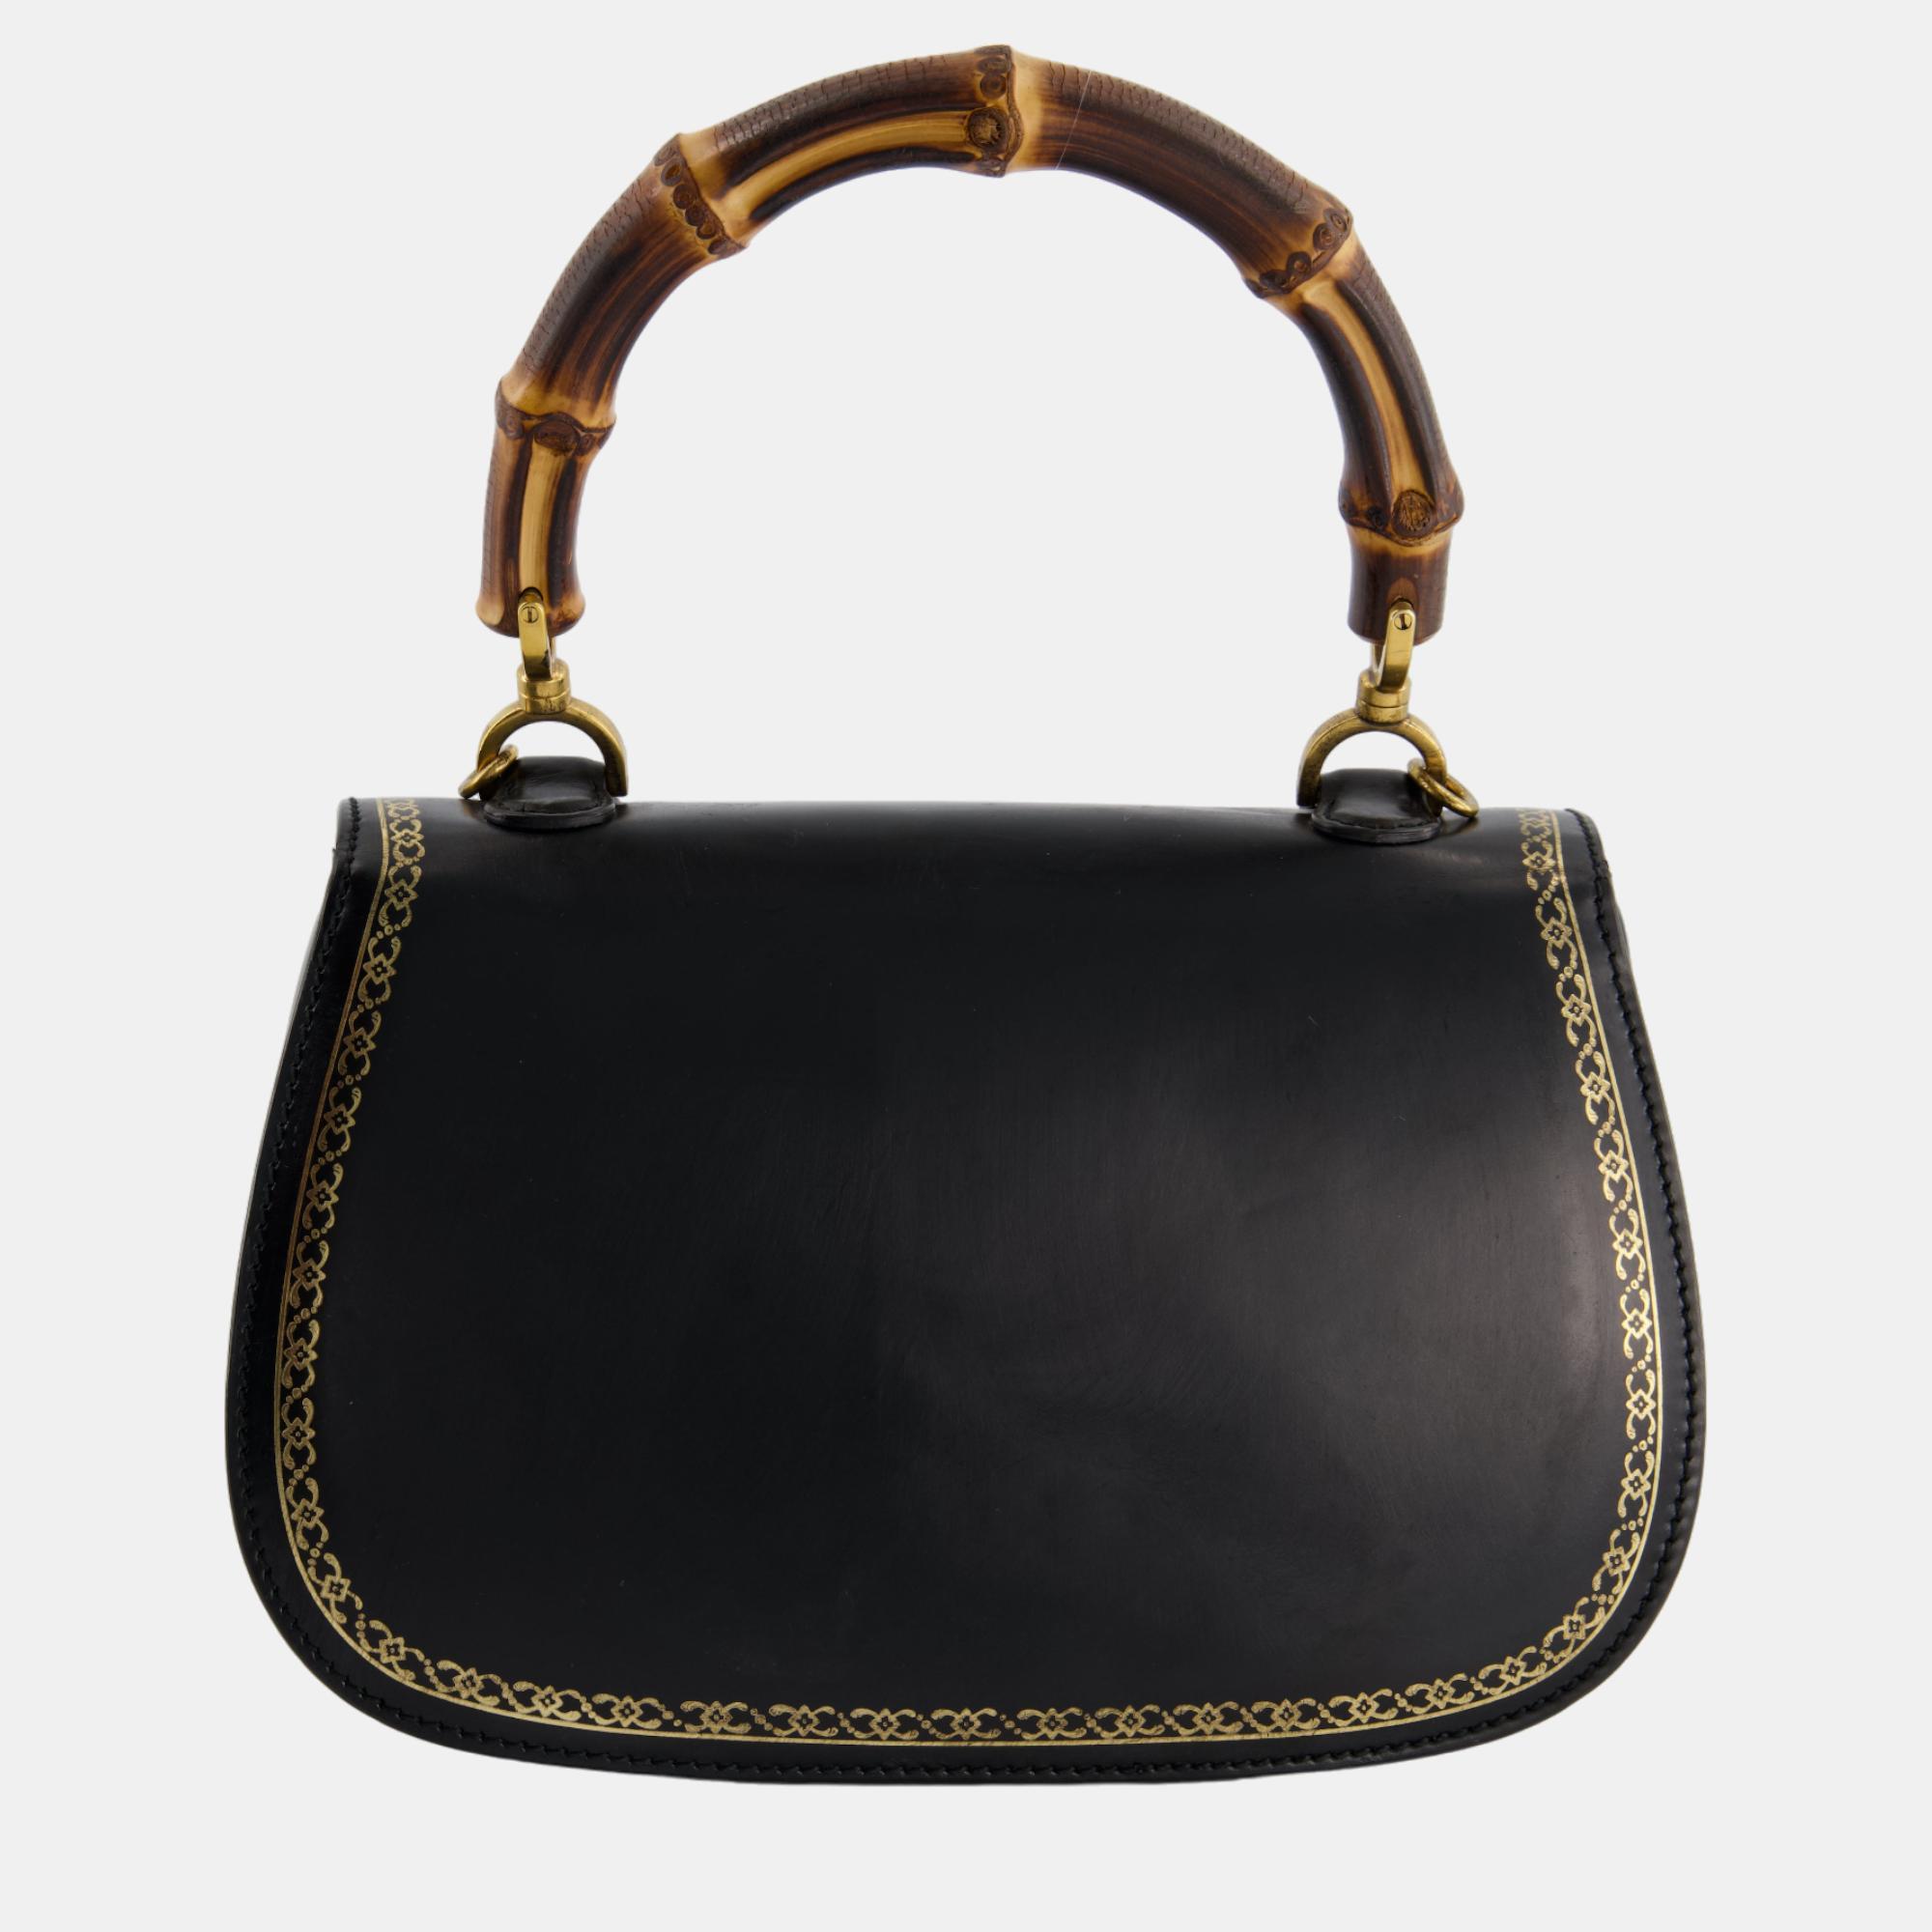 Gucci Fall/Winter 2017 Black With Gold Trim Print Bamboo Top Handle Bag